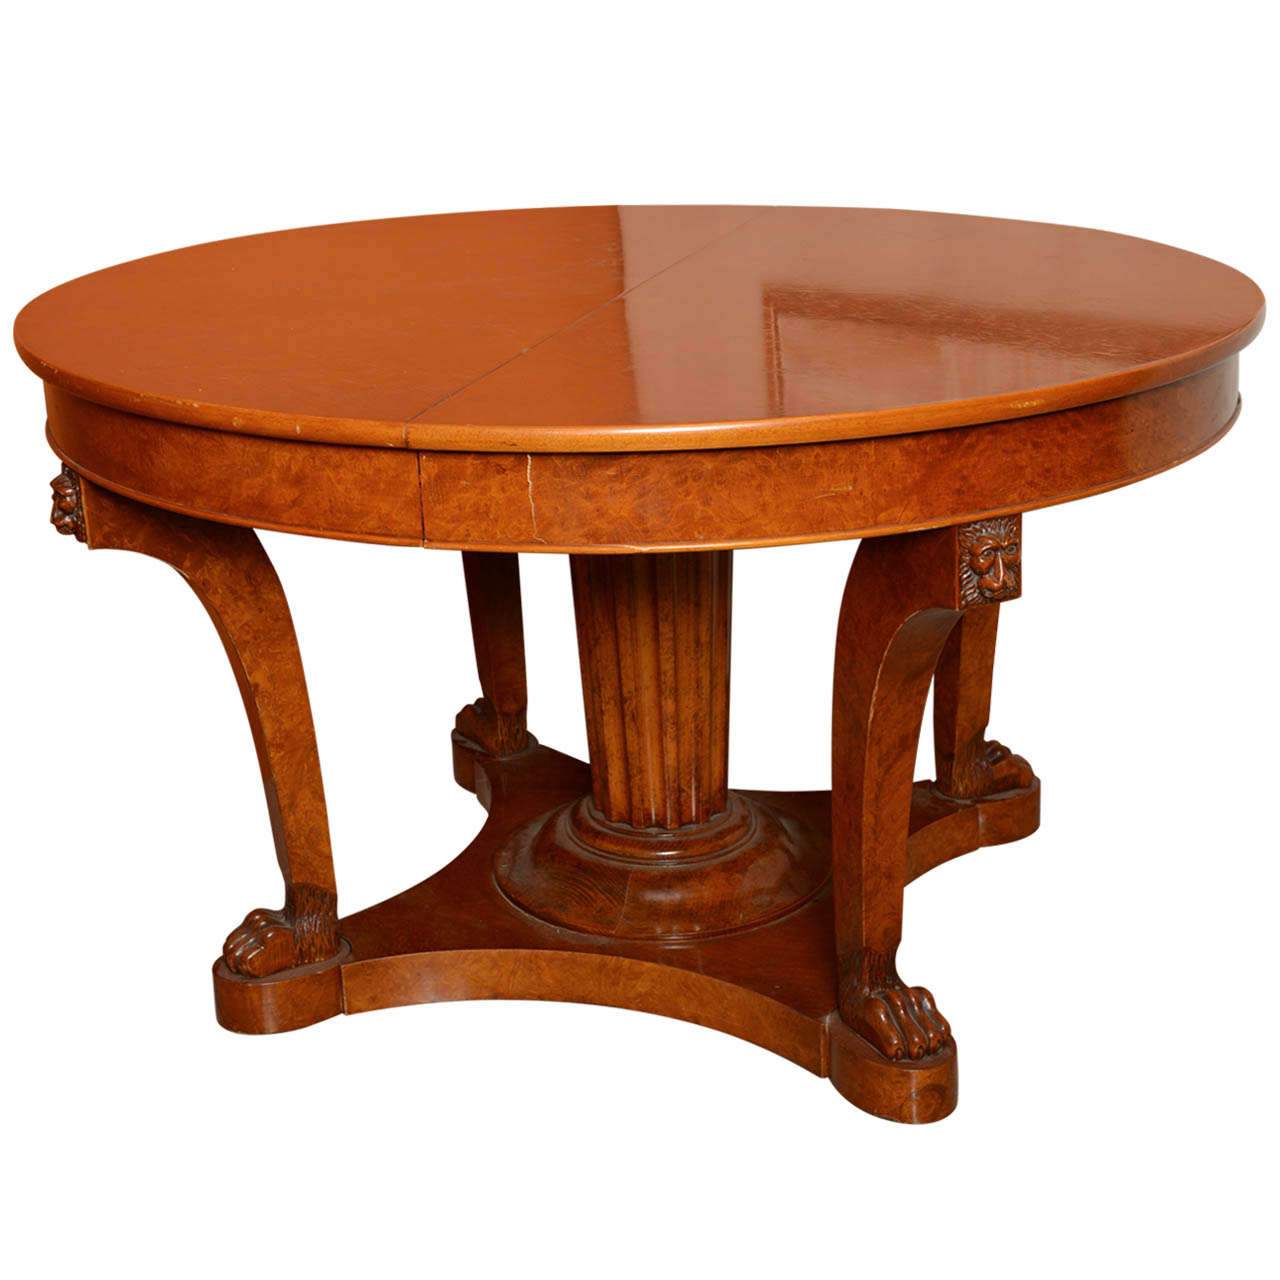 French Empire Revival Burled Walnut and Walnut Extension Dining Table For Sale